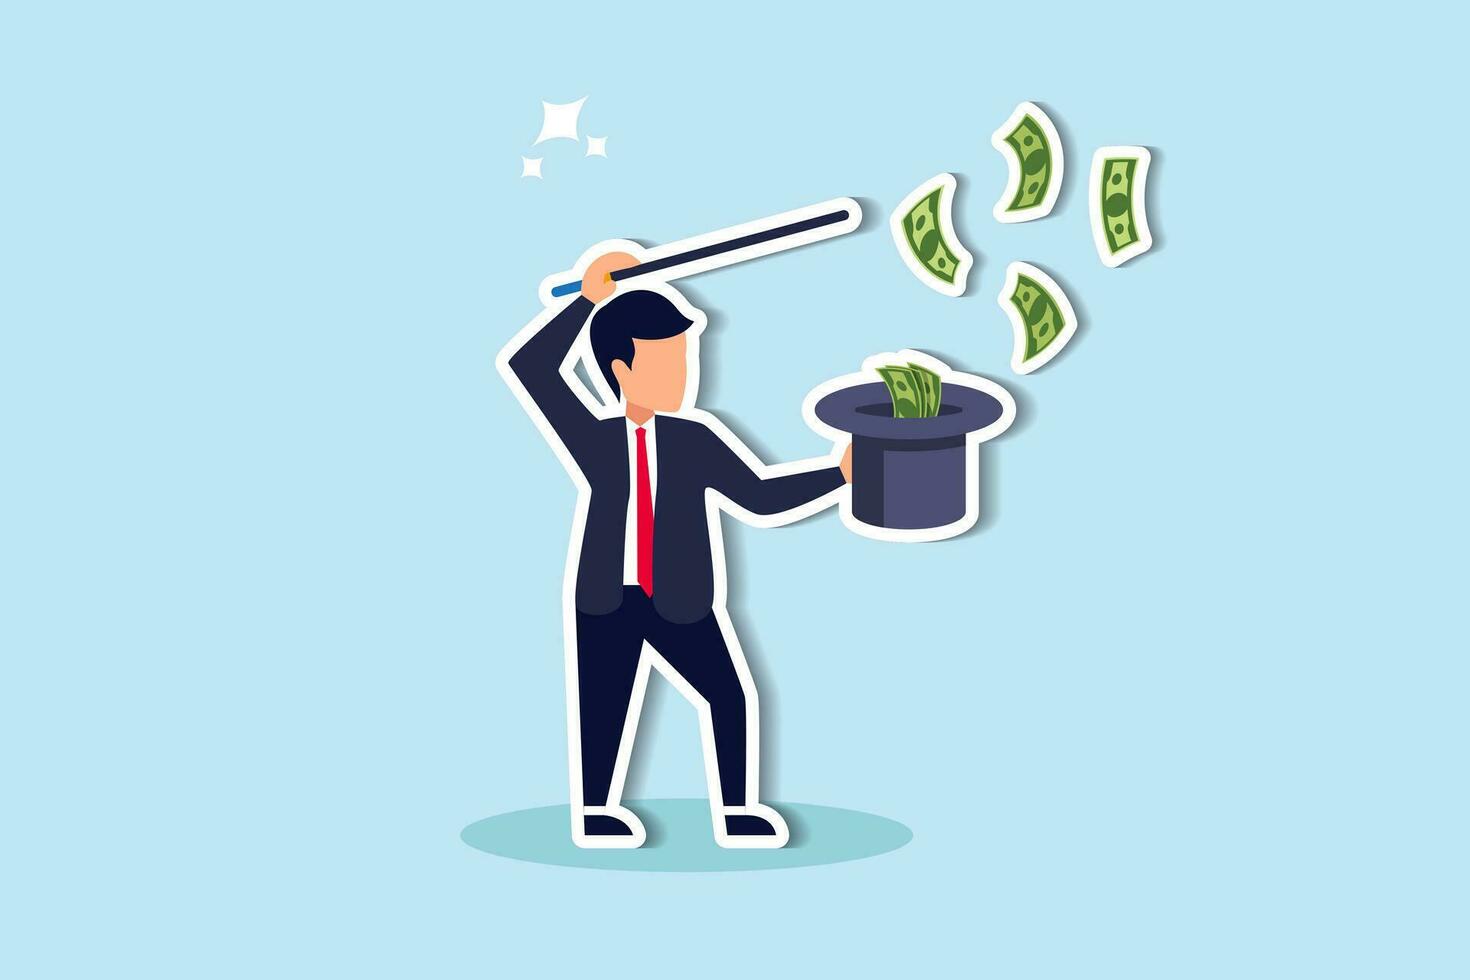 Get rich fast, make money or profit from investment,FED or central bank stimulation money, financial or wealth advisor concept, businessman magician using magic wand to make money from magical hat. vector